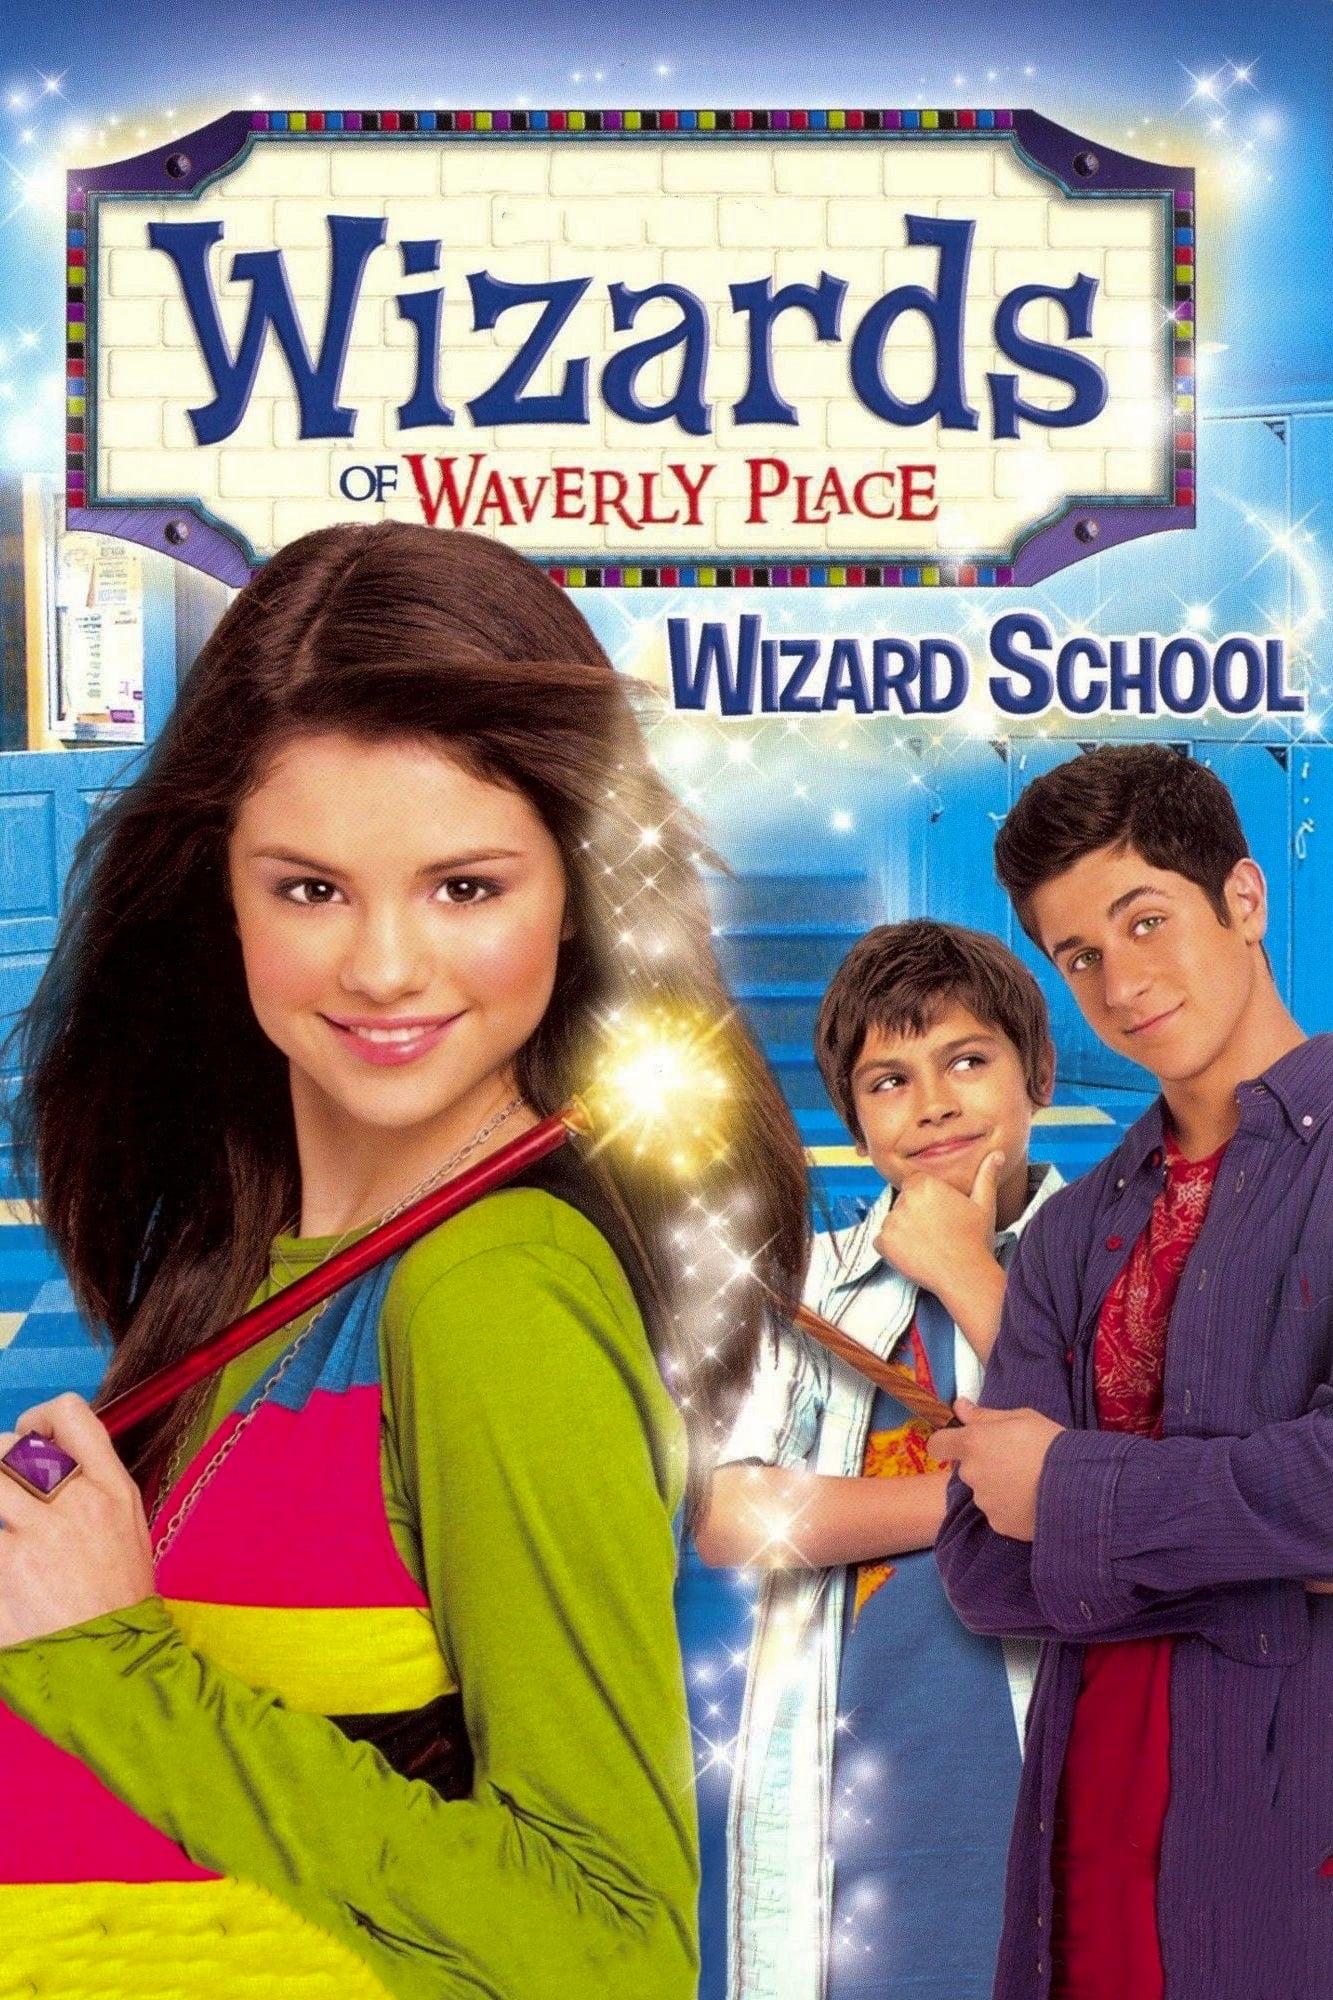 Wizards of Waverly Place: Wizard School poster